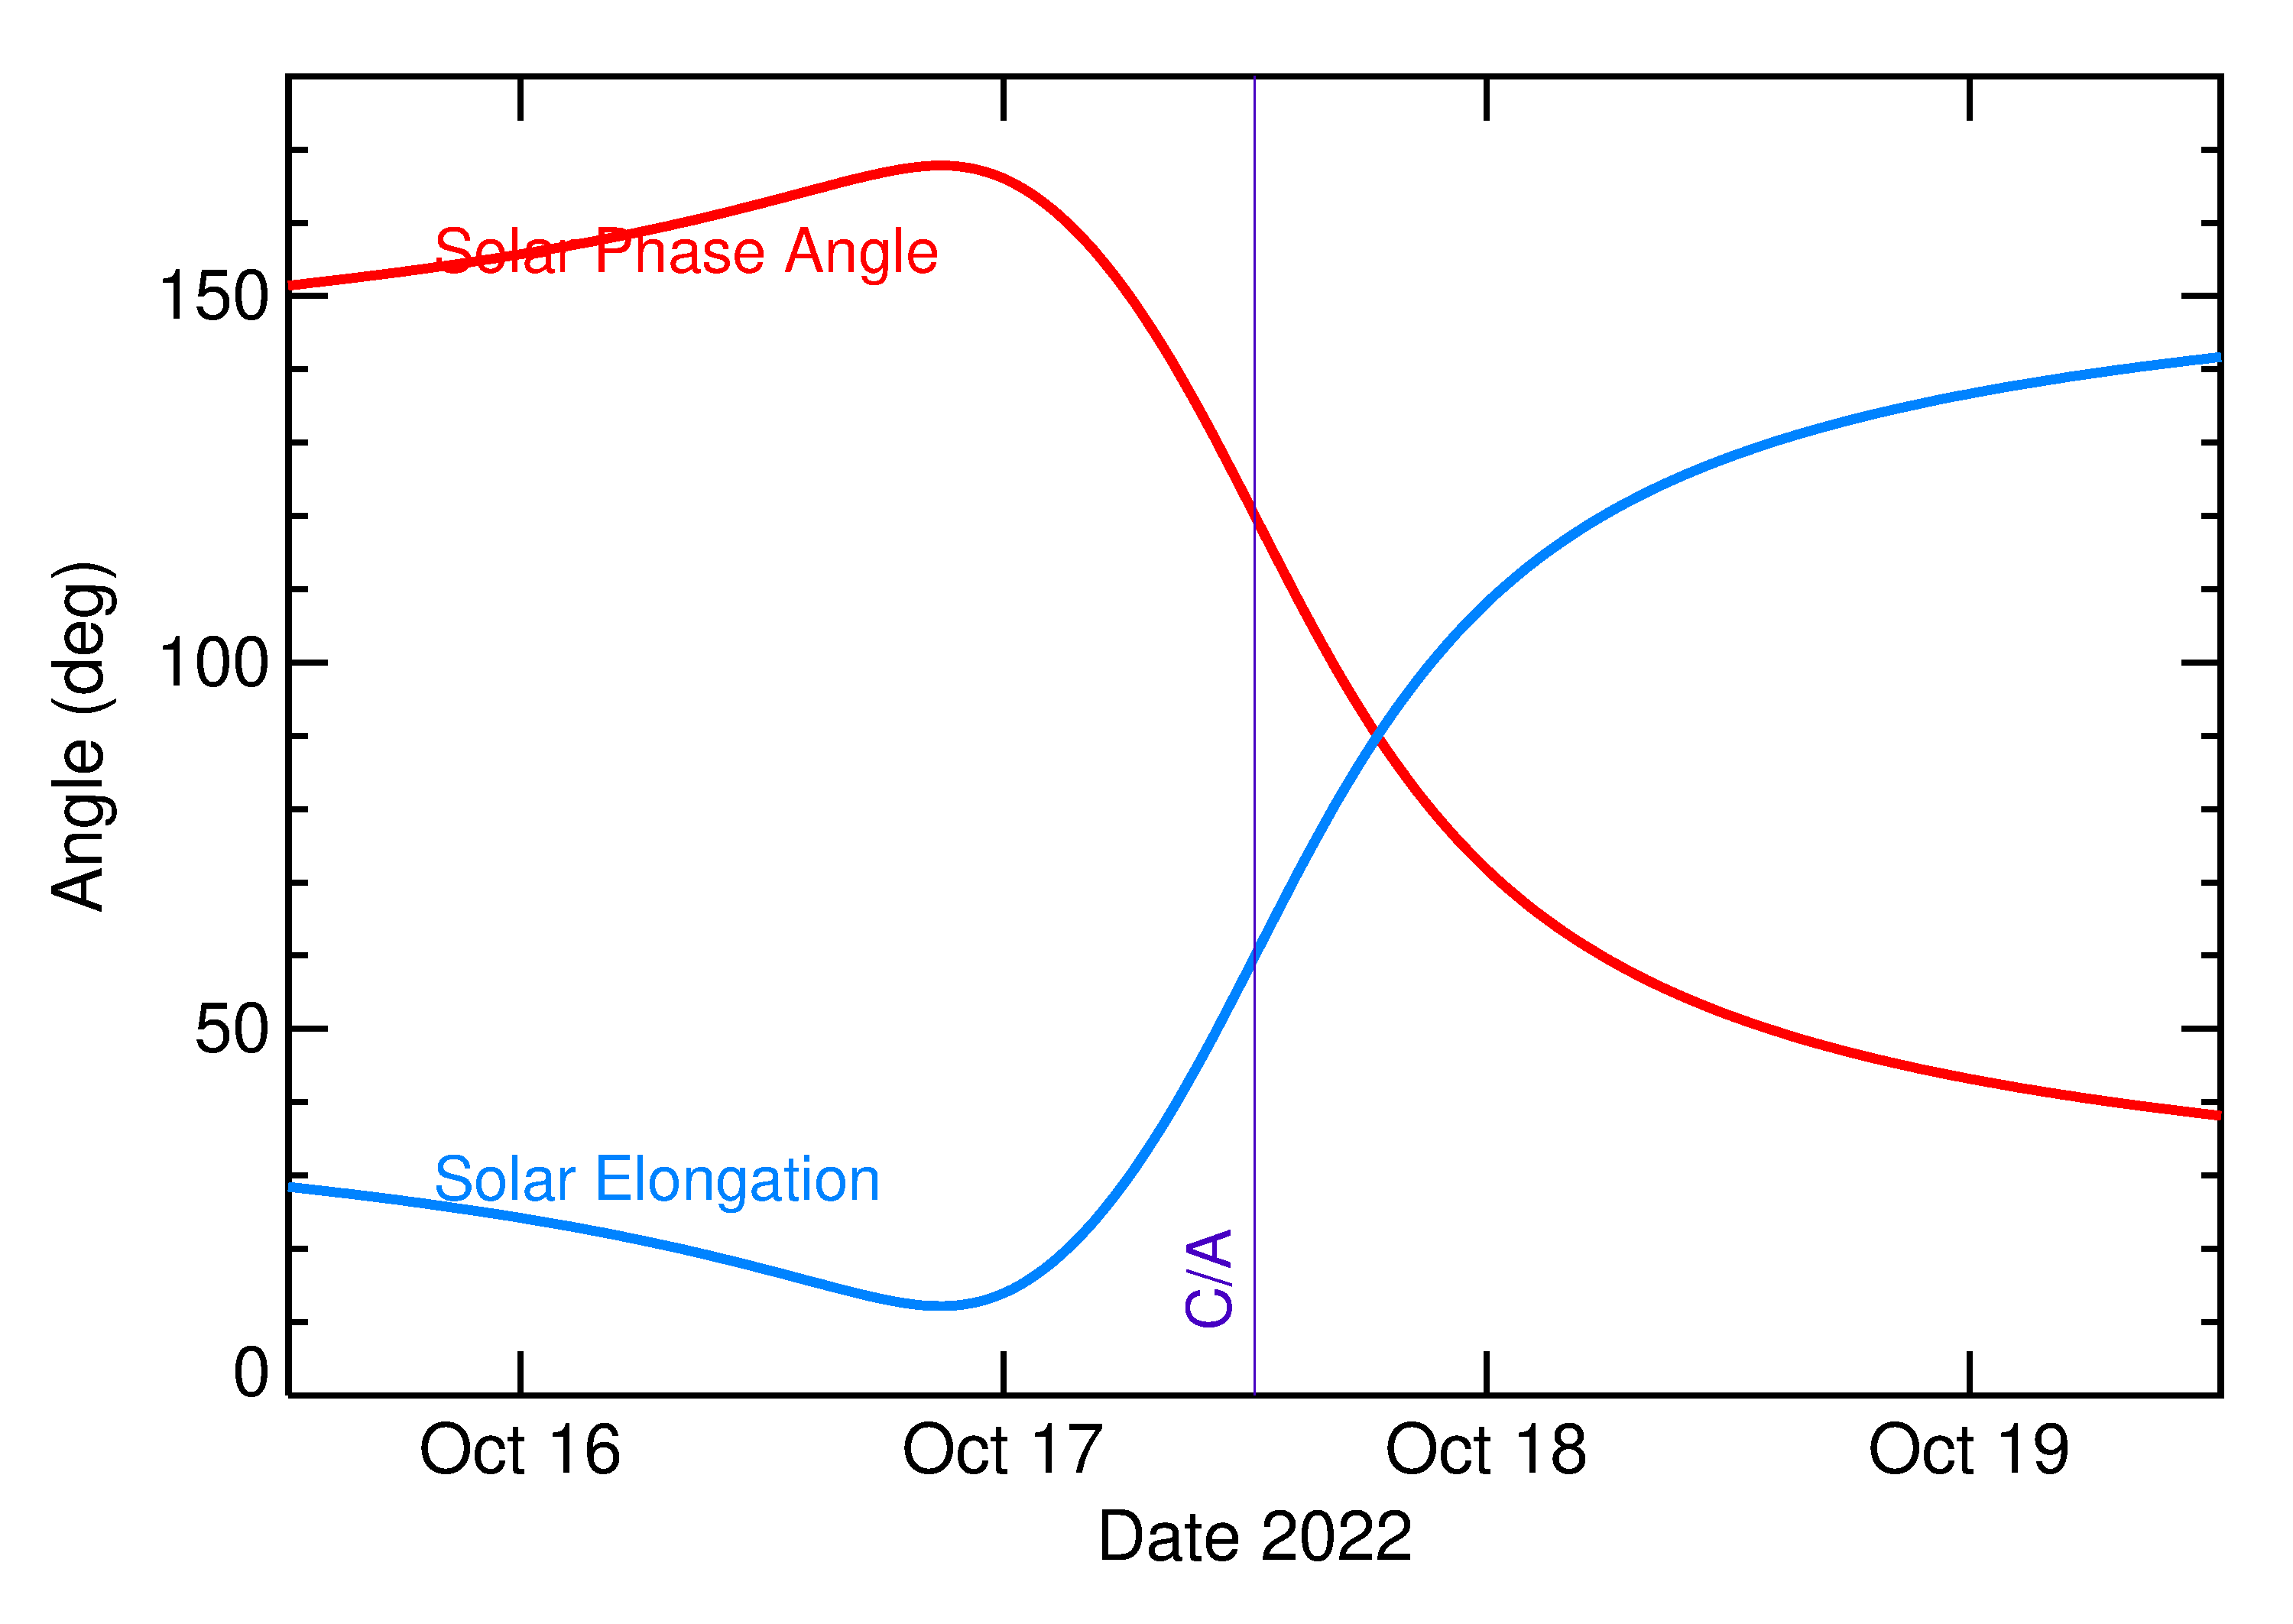 Solar Elongation and Solar Phase Angle of 2022 UA5 in the days around closest approach